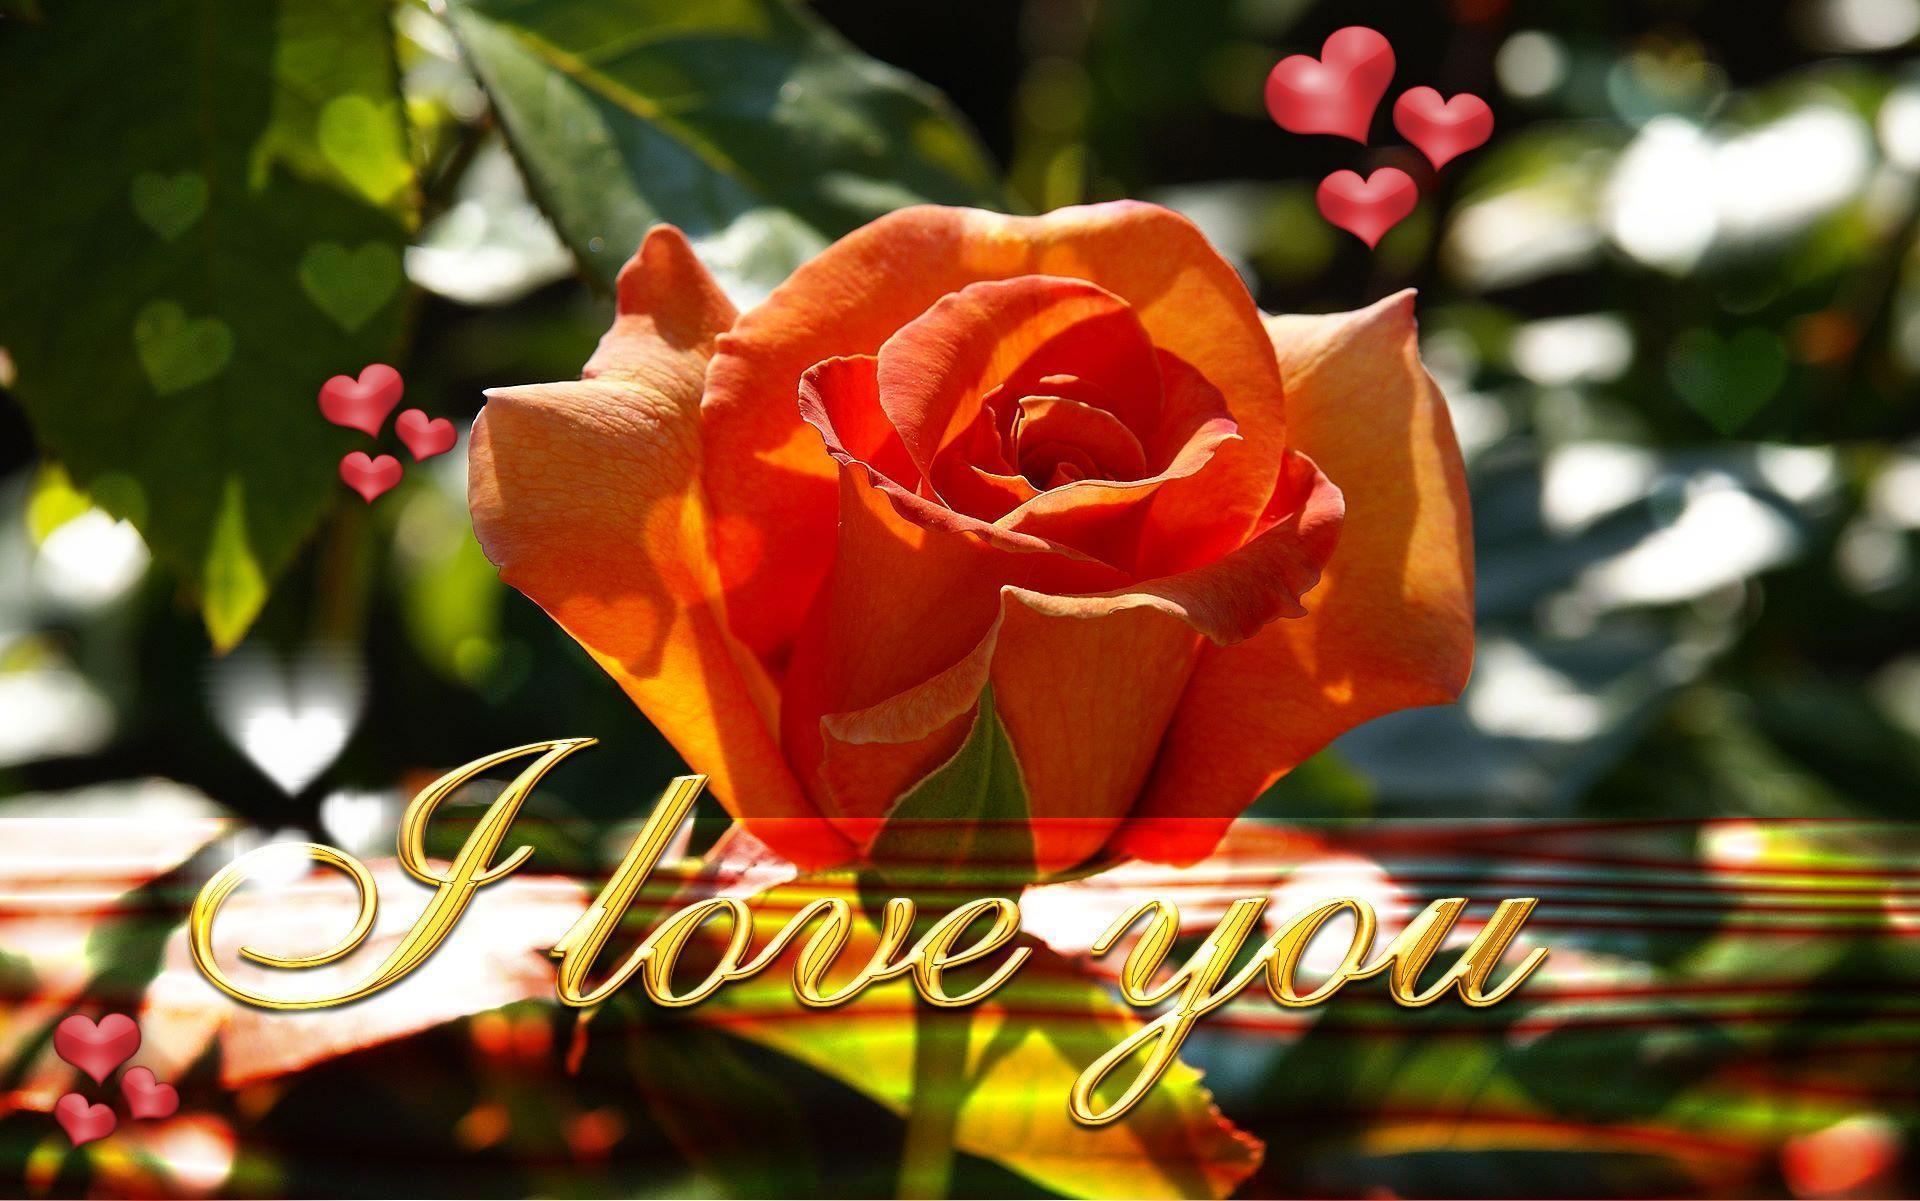 Wallpapers I Love You Rose Image 6 HD Wallpapers